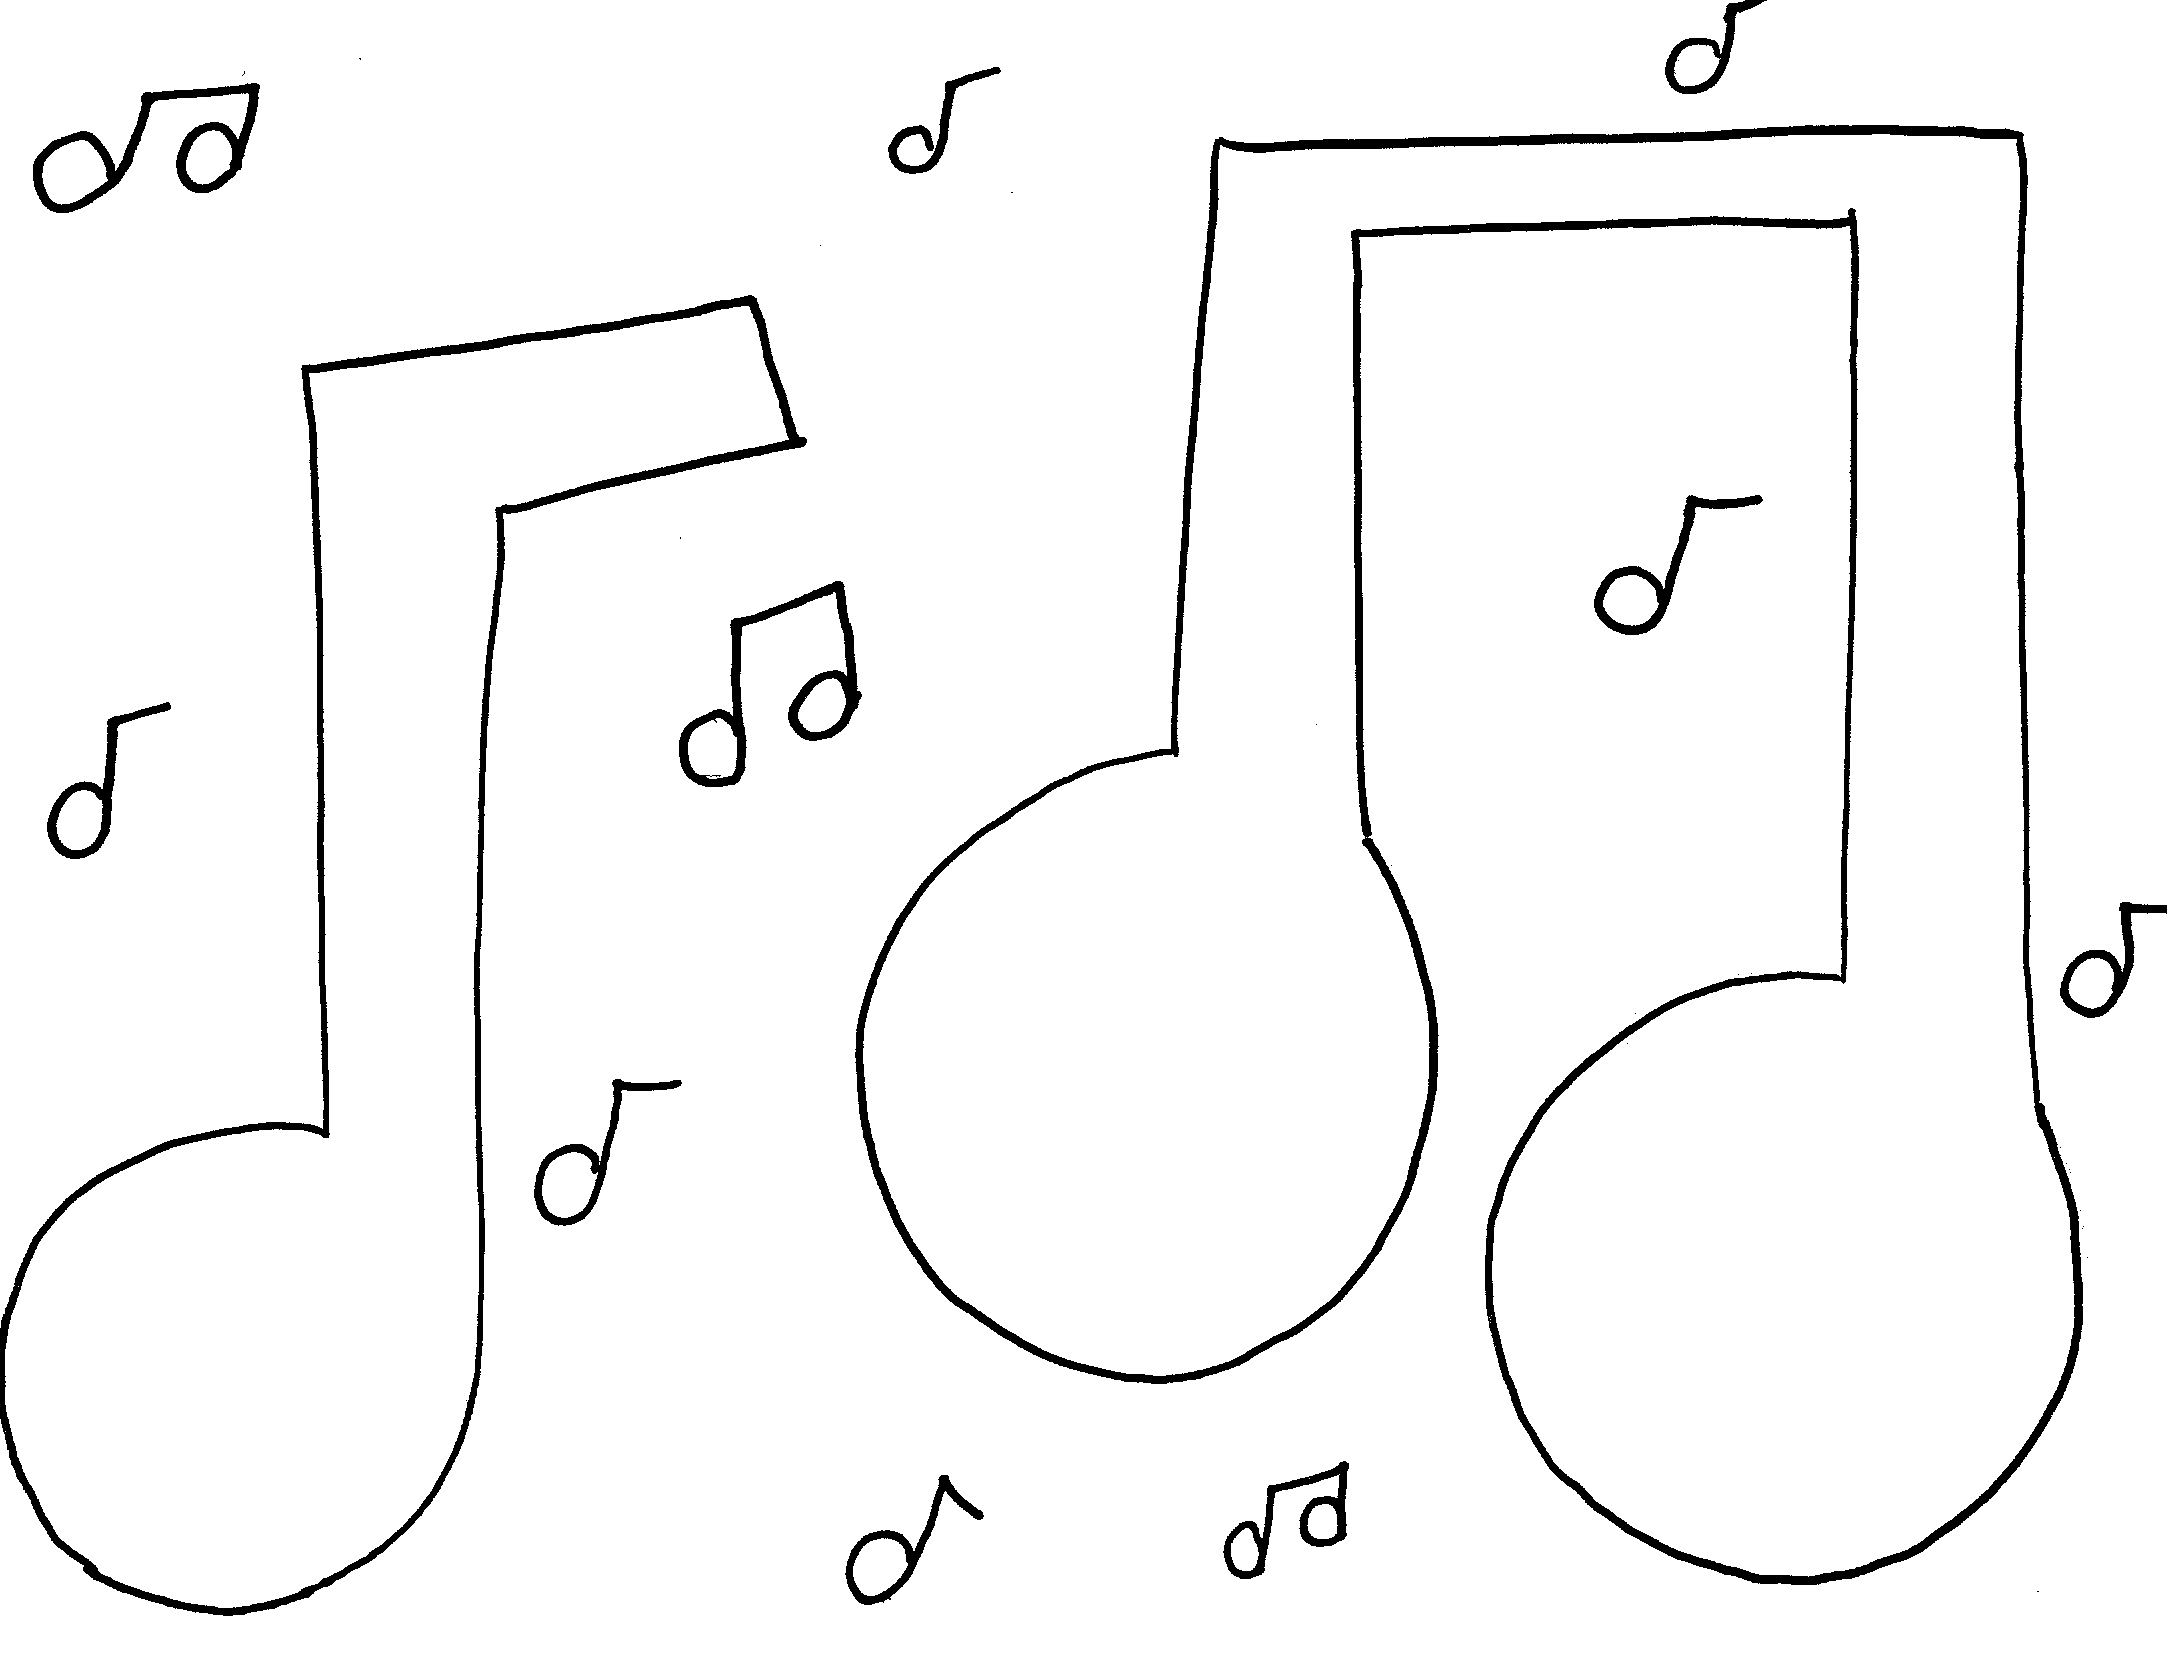 Coloring pages music notes coloring pages